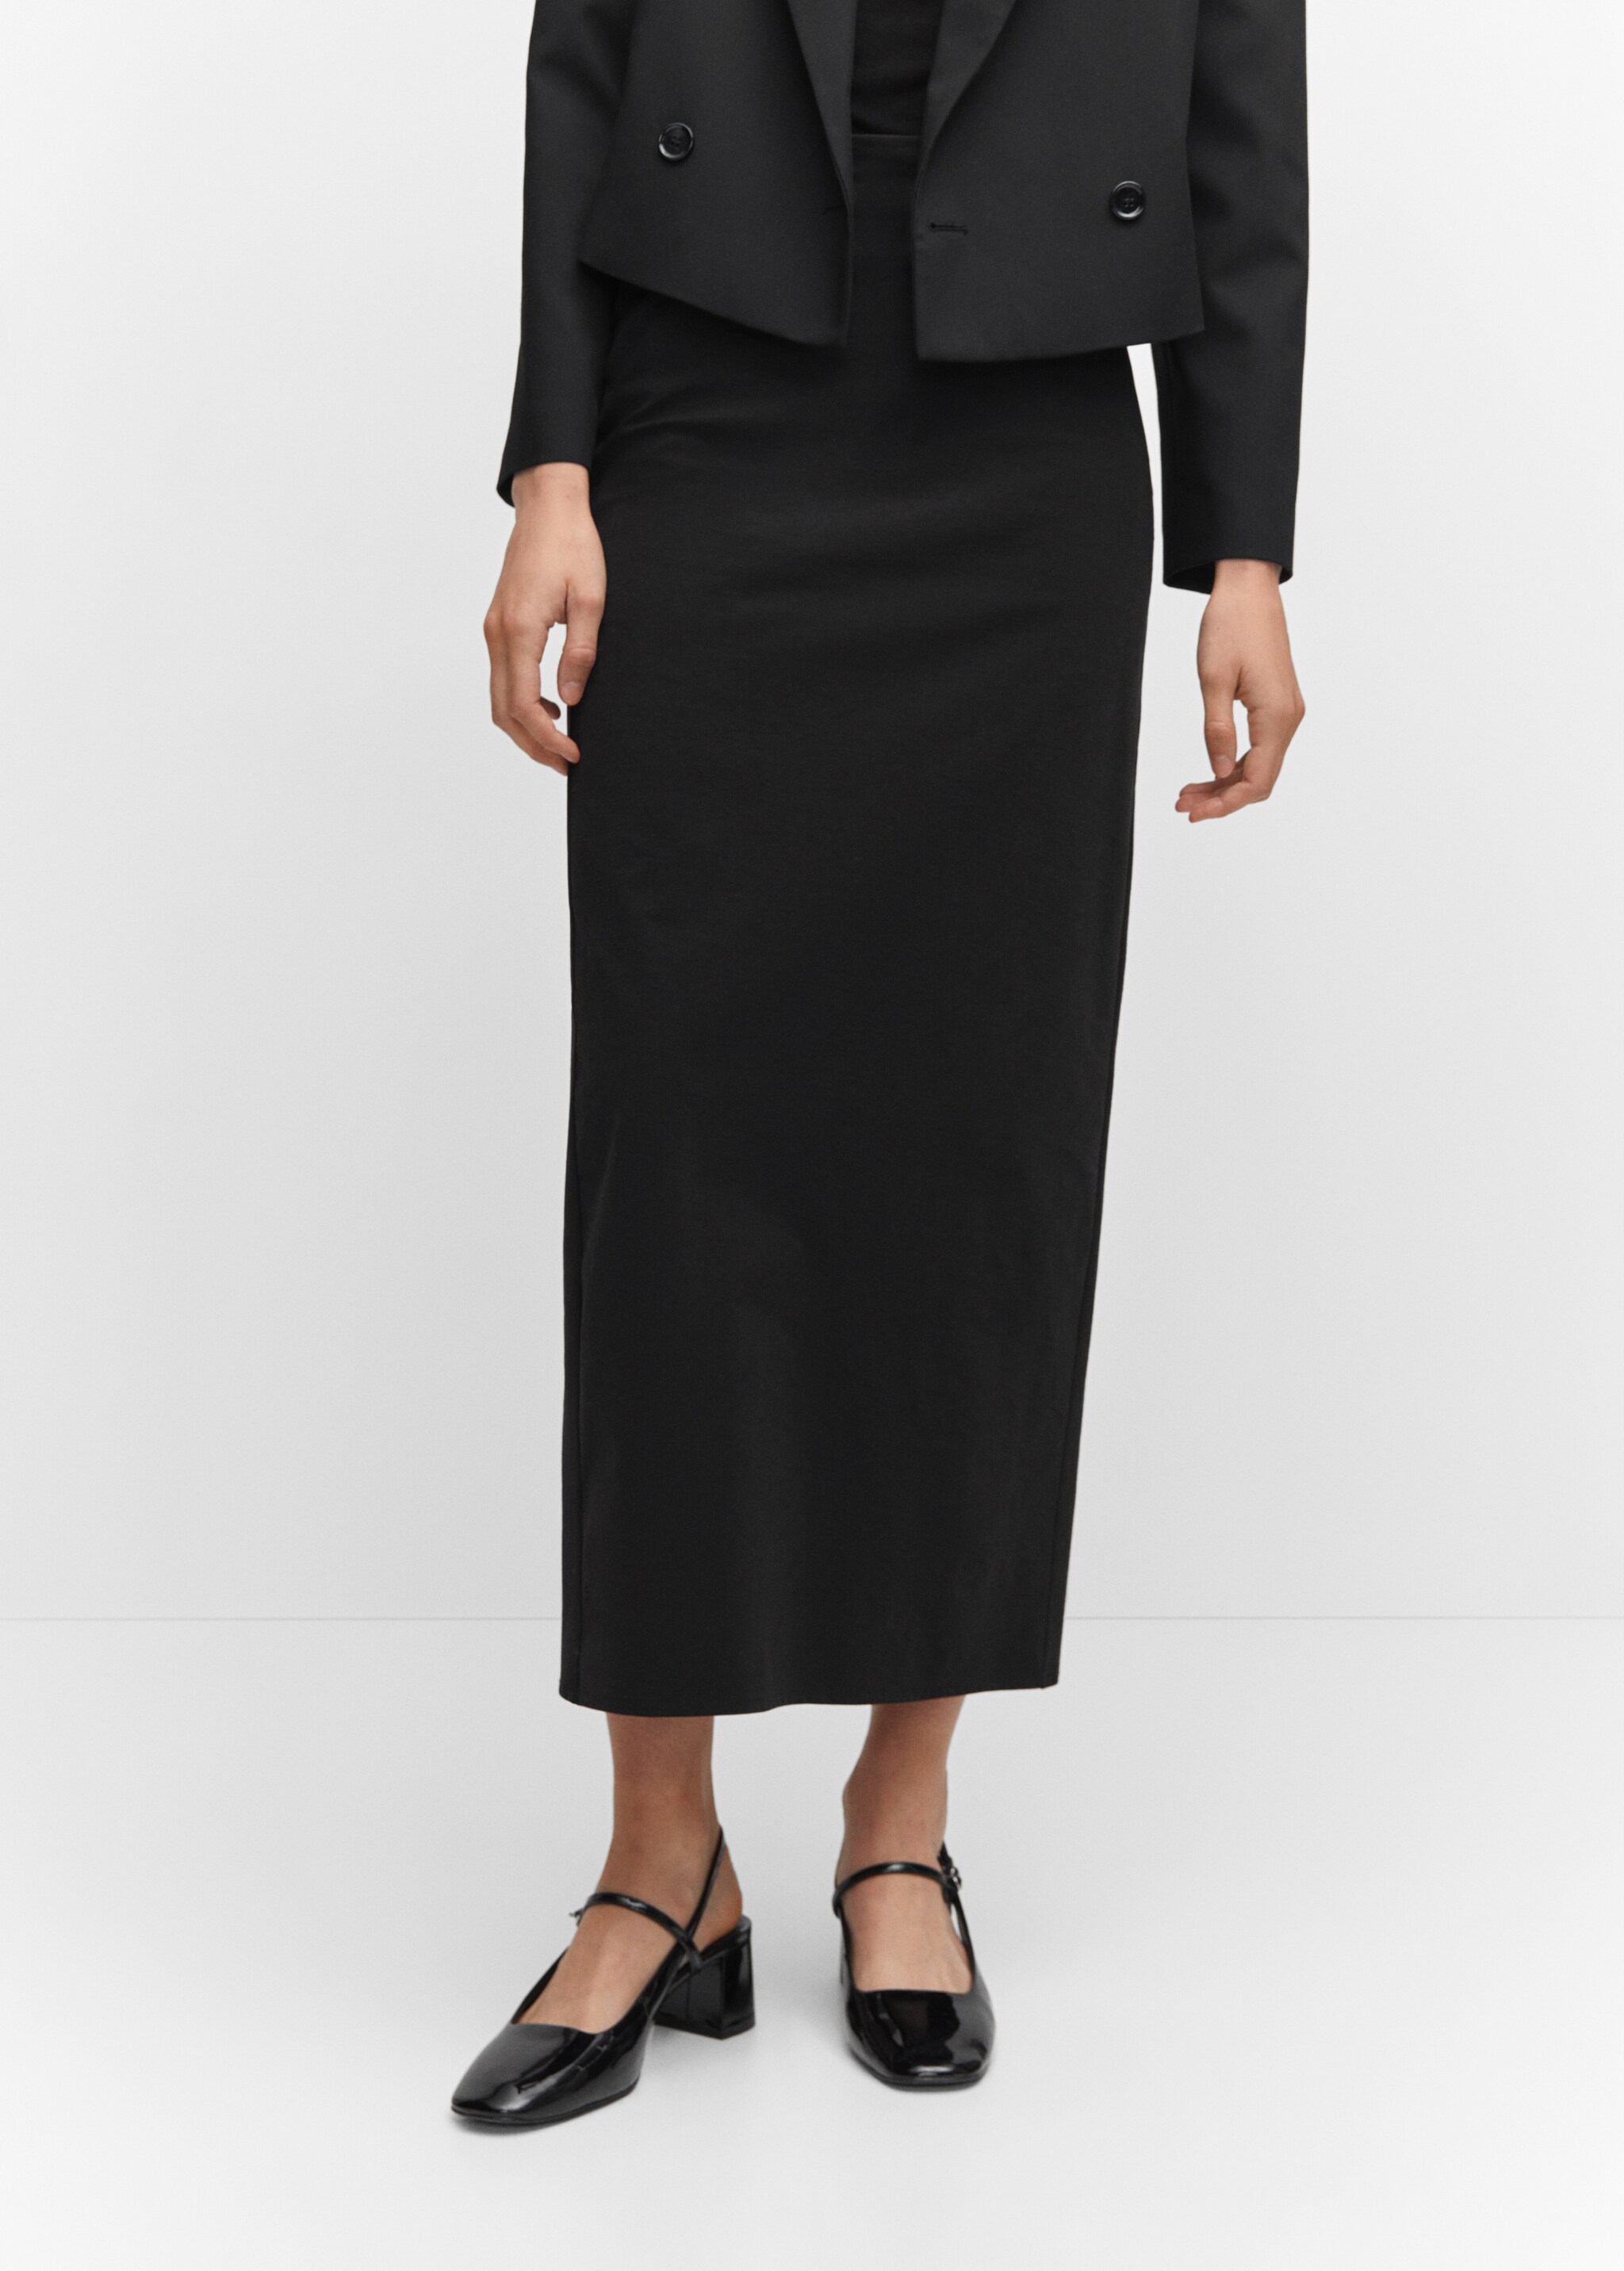 Fitted skirt with slit - Medium plane